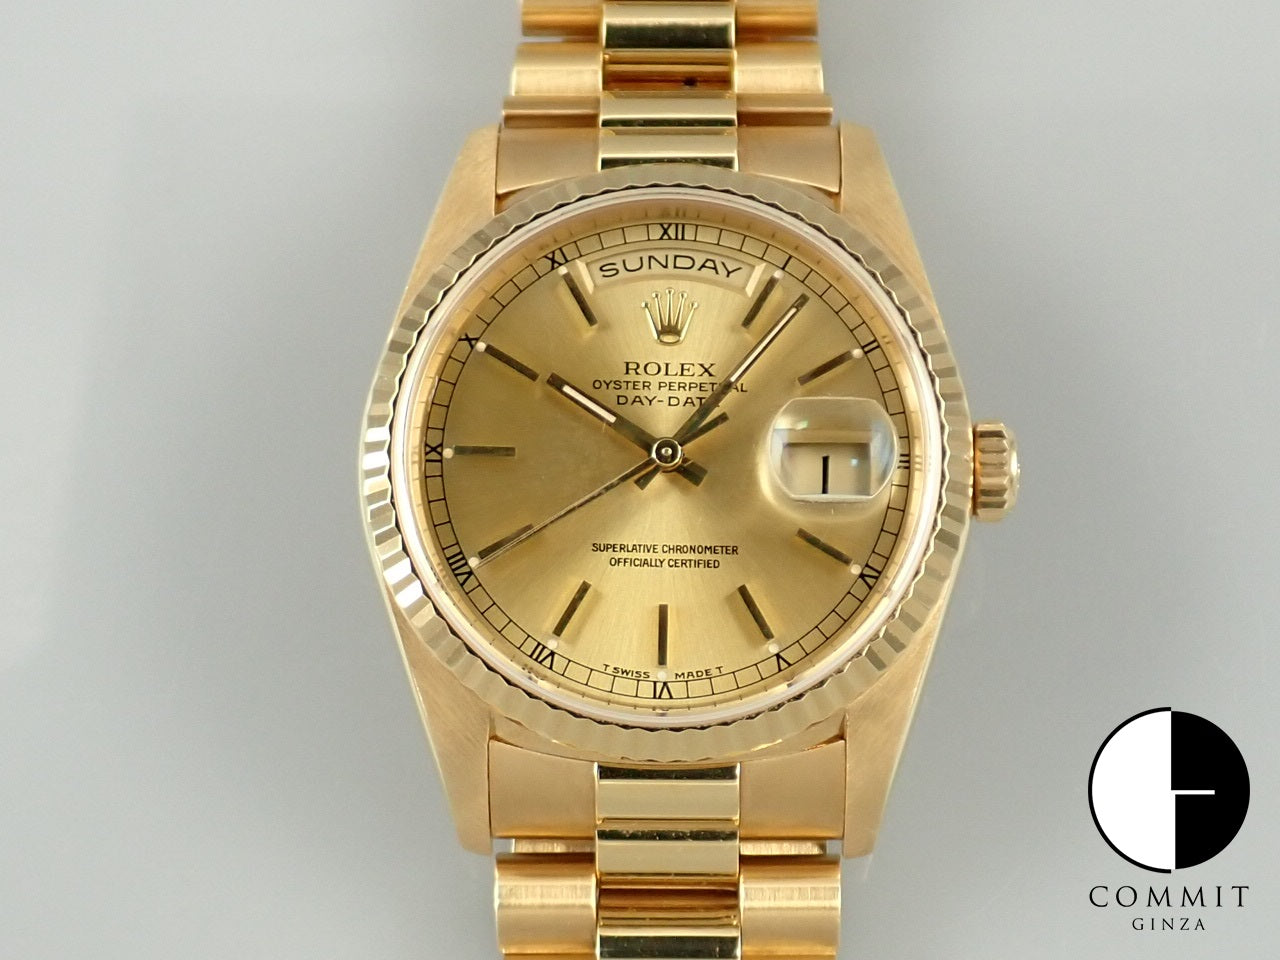 Rolex Day-Date E series &lt;Box and other details&gt;